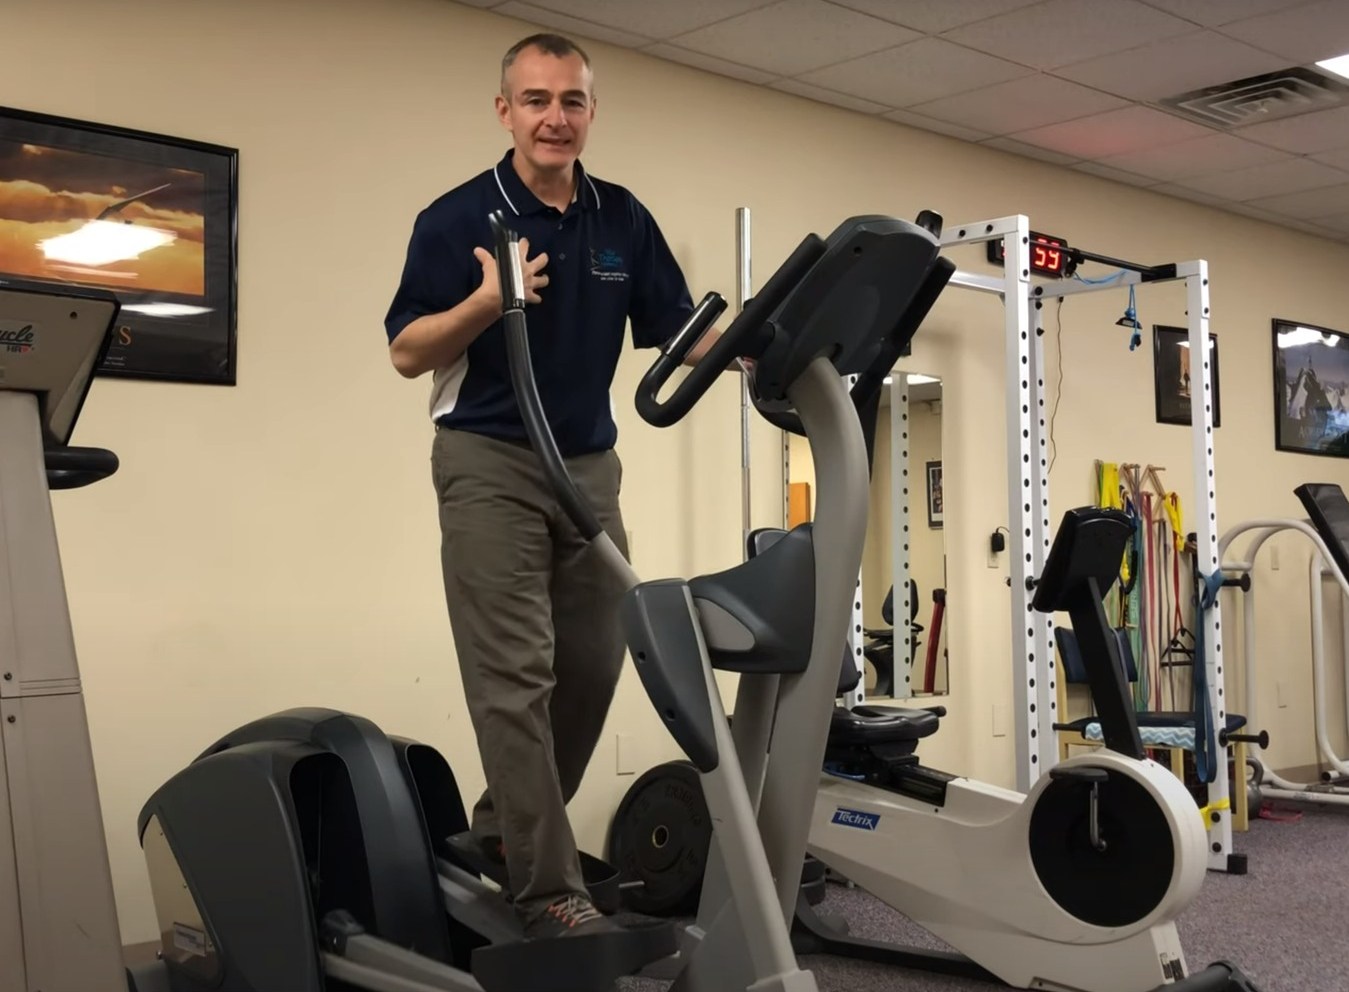 How to Choose the BEST Elliptical Machine for Home Physical Therapy 2022